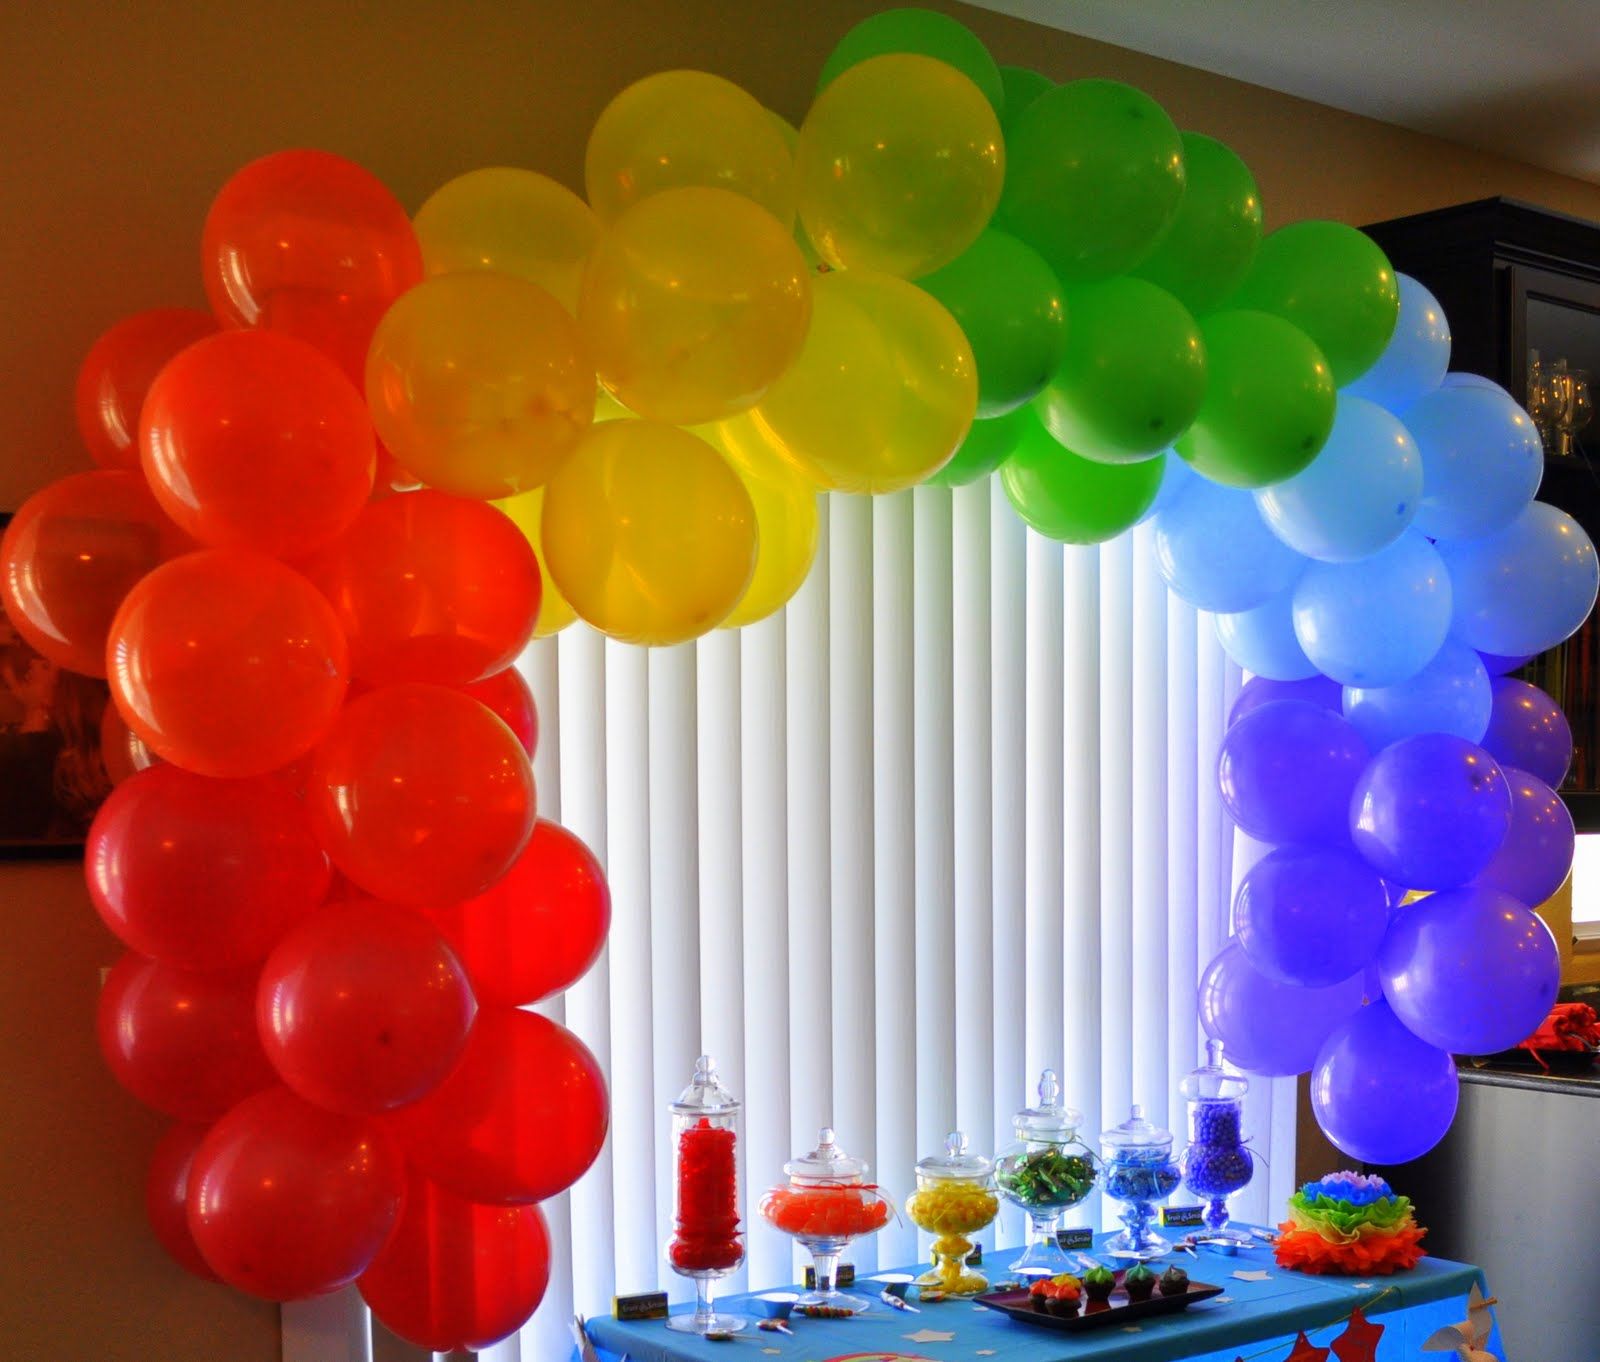 How To Use A Balloon Arch Strip